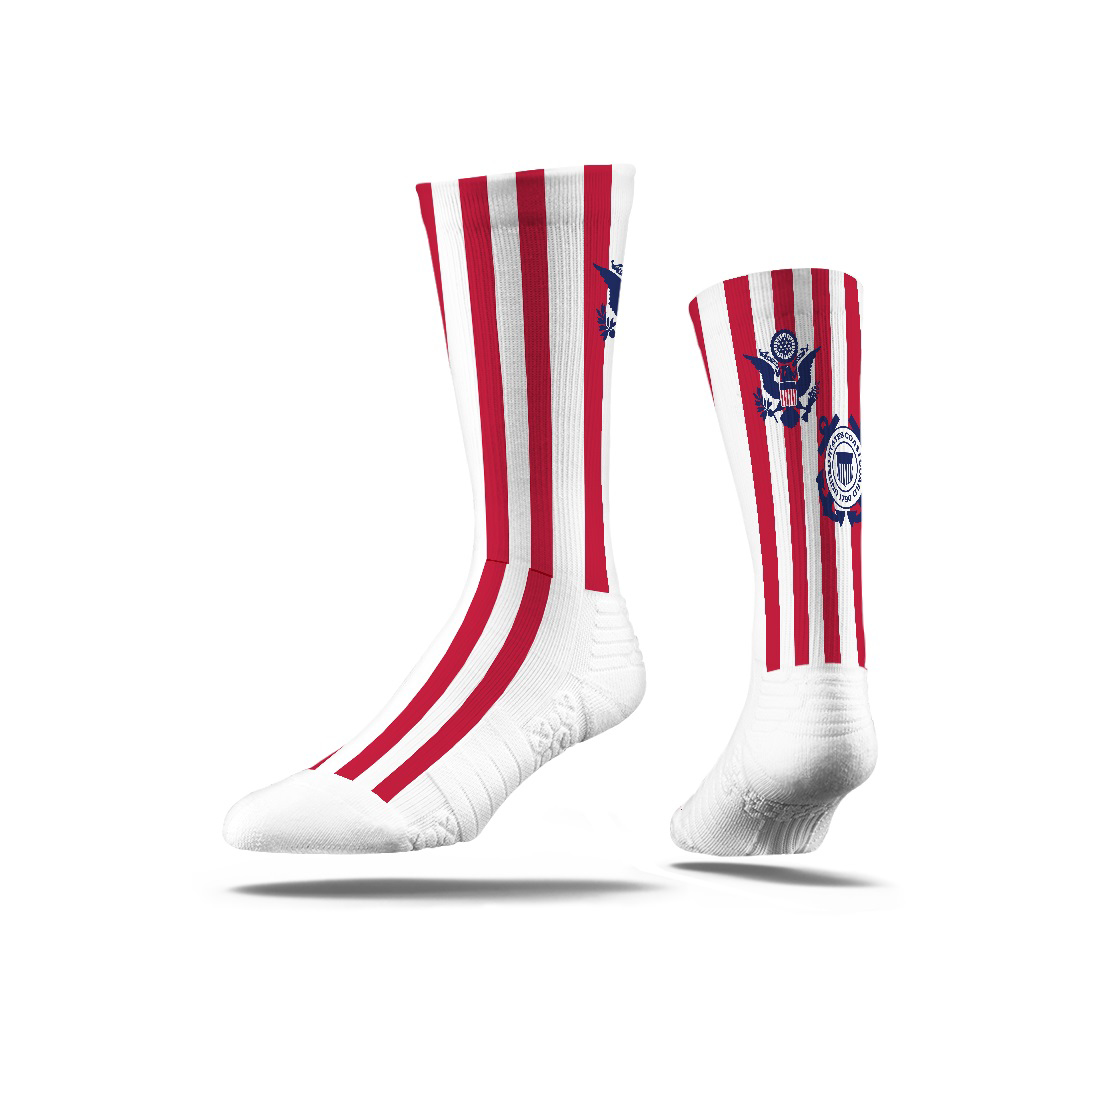 Premium Full Sub Socks  in white with red stripes and 3 colour print logo